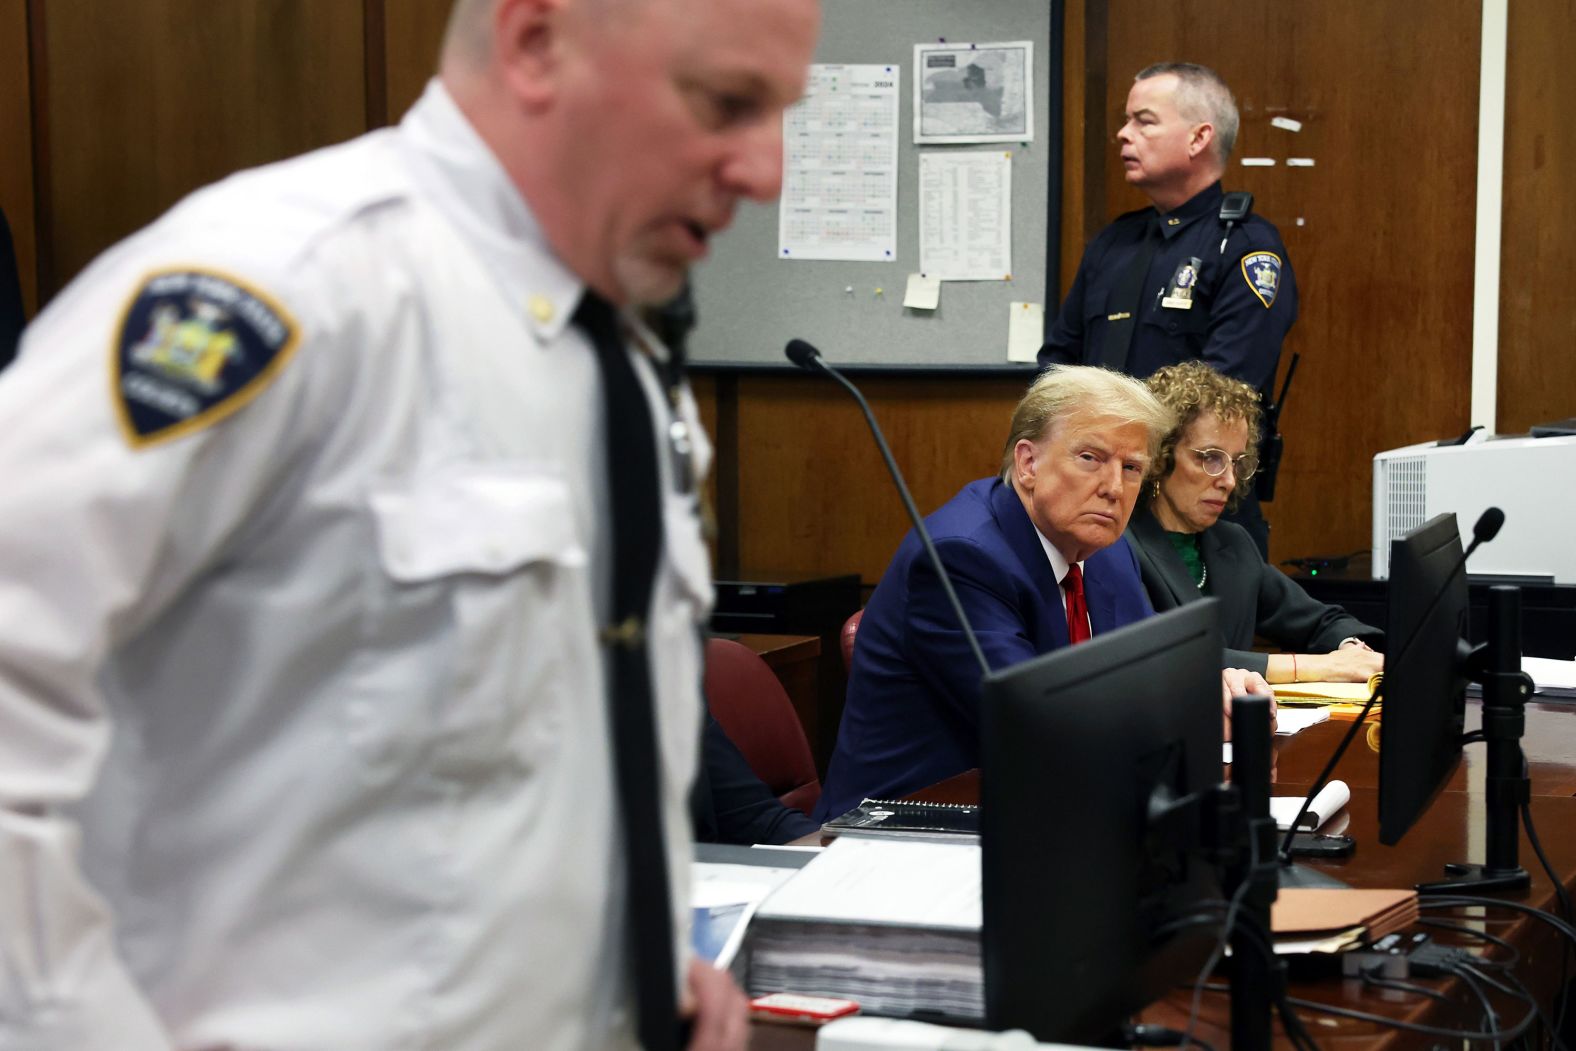 Former US President Donald Trump appears in court for a pre-trial hearing in New York on Monday, March 25. Trump's historic criminal trial in the New York hush money case against him <a href="index.php?page=&url=https%3A%2F%2Fwww.cnn.com%2F2024%2F03%2F25%2Fpolitics%2Ftakeaways-trump-legal-drama-hush-money-trial-fraud-bond%2Findex.html" target="_blank">will begin with jury selection on April 15</a>, Judge Juan Merchan said Monday. Trump is charged with 34 counts of falsifying business records stemming from reimbursements to Michael Cohen, Trump's former lawyer and fixer, for hush money payments he made before the 2016 election to adult film star Stormy Daniels to keep her from going public about an alleged affair with Trump. The former president has pleaded not guilty and denied the affair.